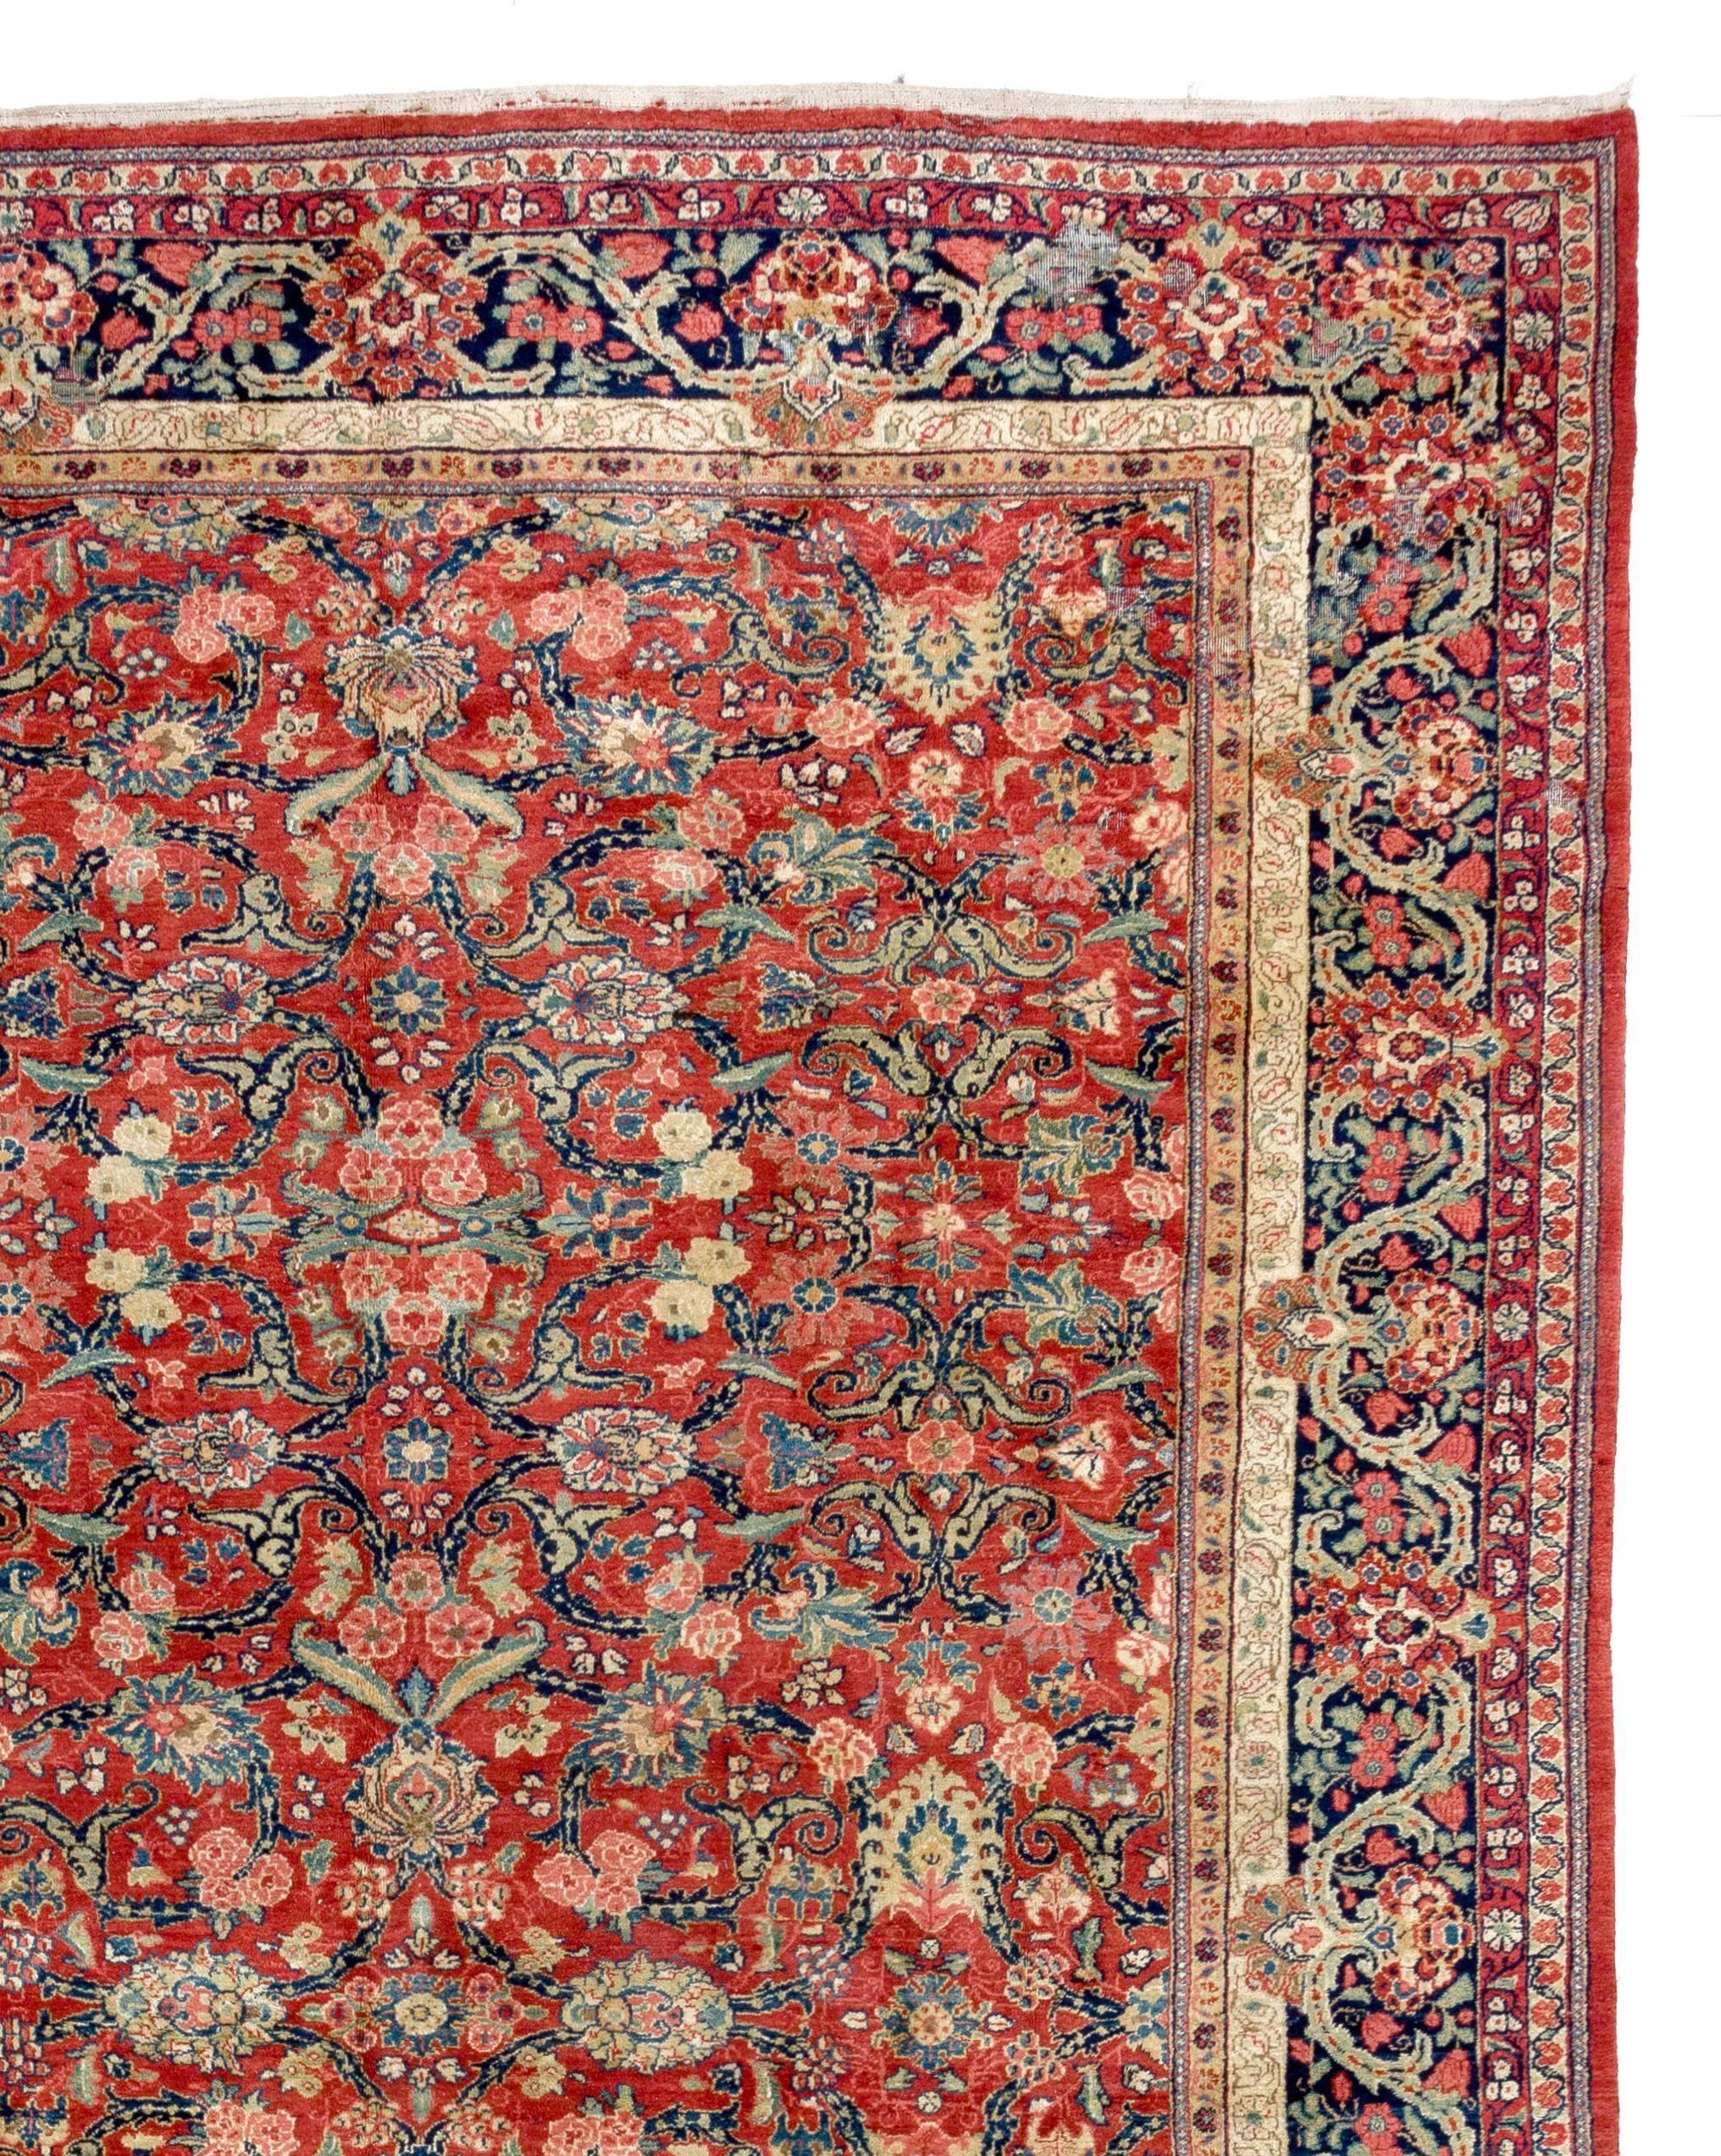 Hand-Knotted 11 x 18.4 Ft Antique Persian Mahal Carpet, late 19th Century.